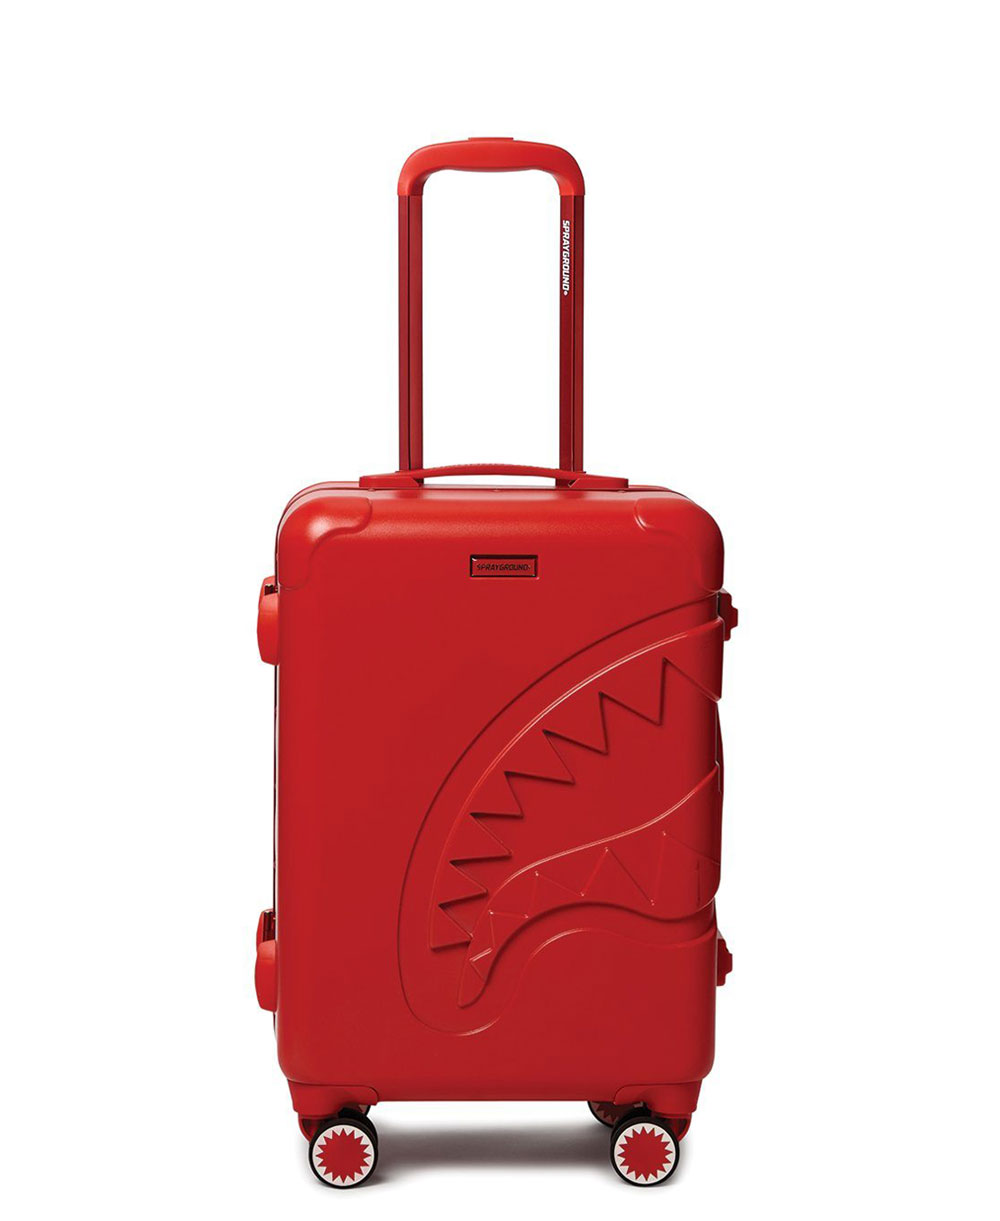 ZULZ Carry-On Travel Bag / Luggage